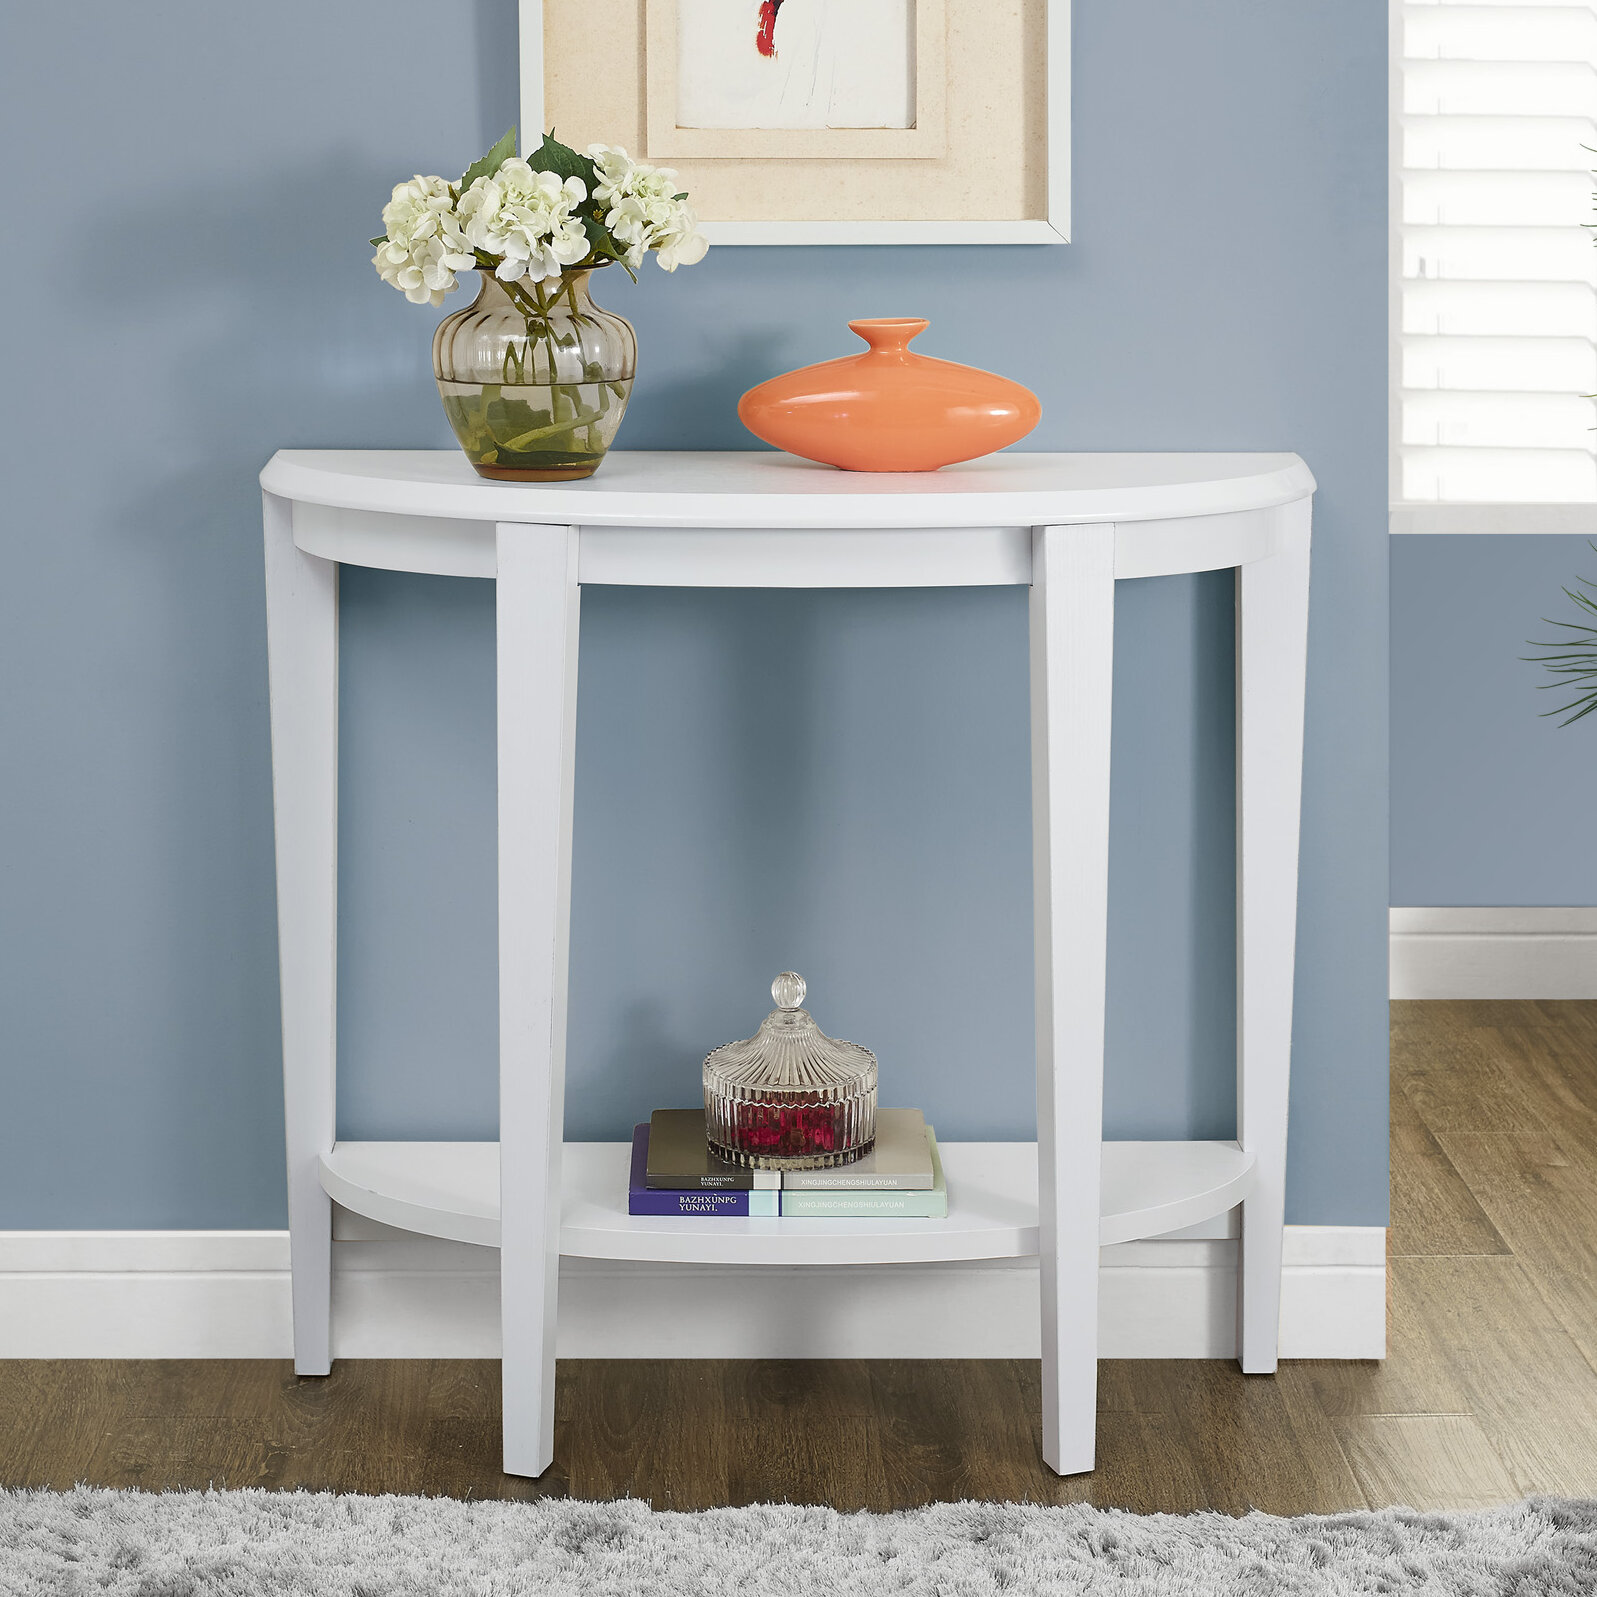 20 Small Accent Tables for Small Spaces in Your Home - Kelley Nan